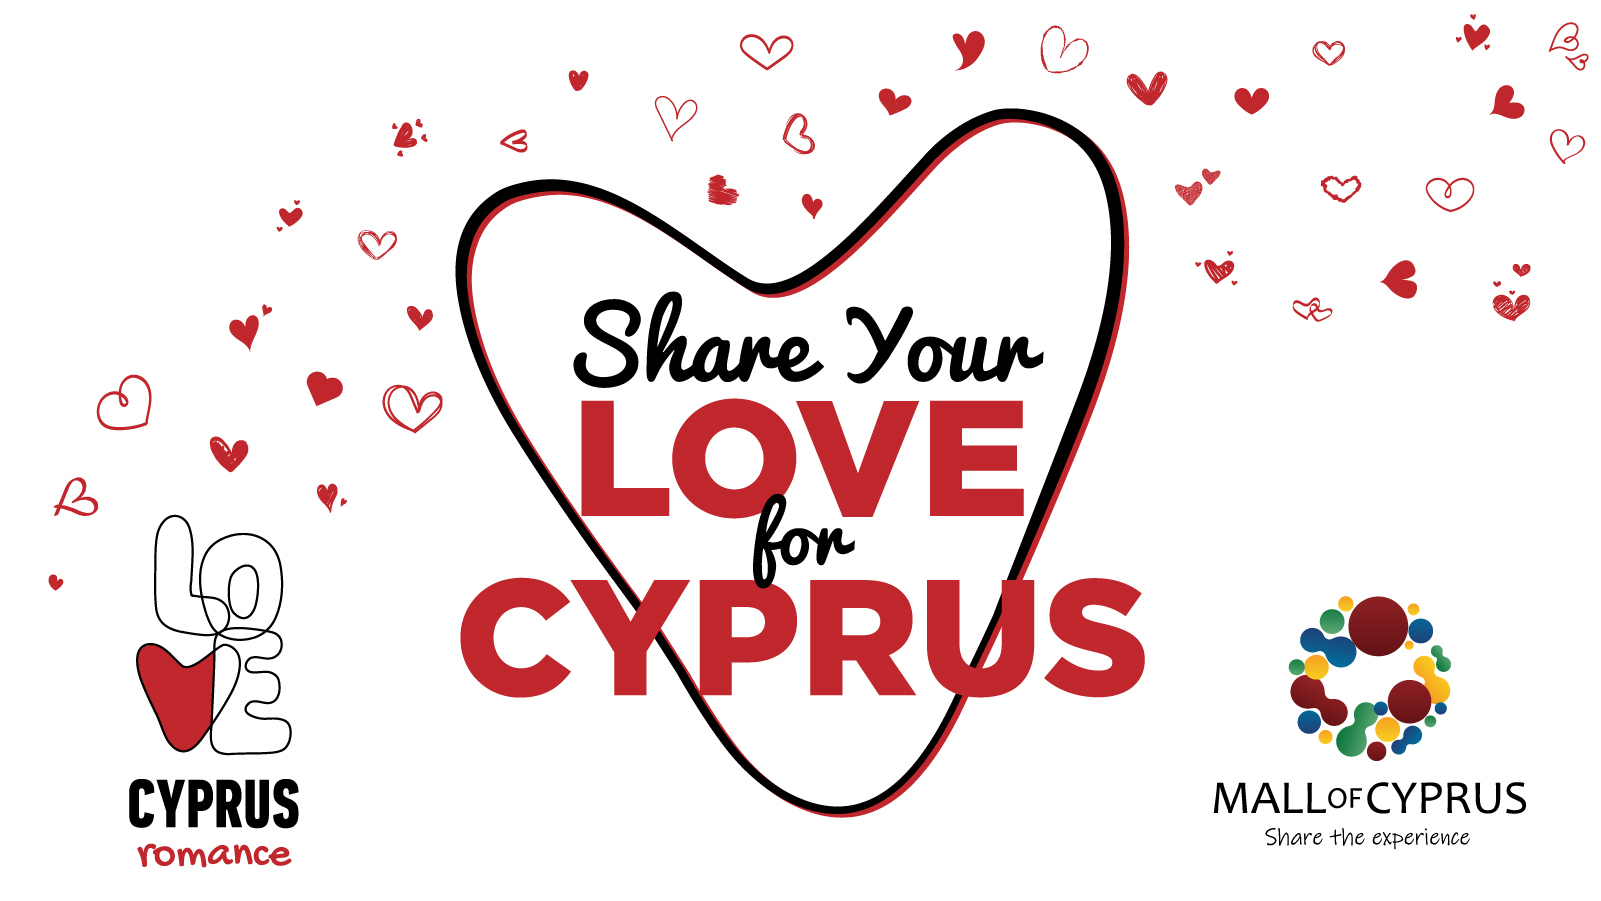 Share your Love for Cyprus! (Photos & Video)